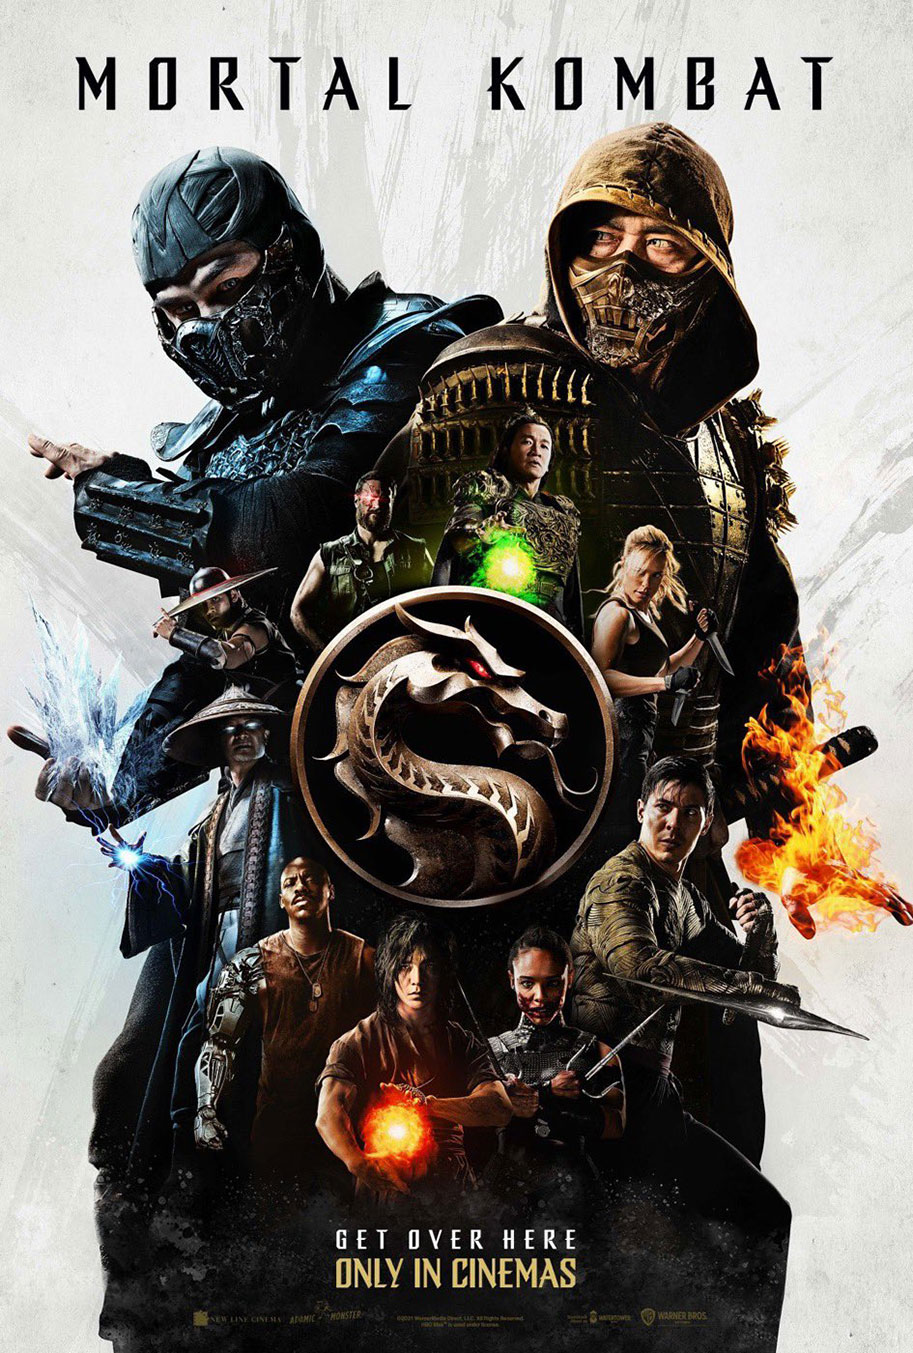 Who's in the Mortal Kombat 2021 cast?